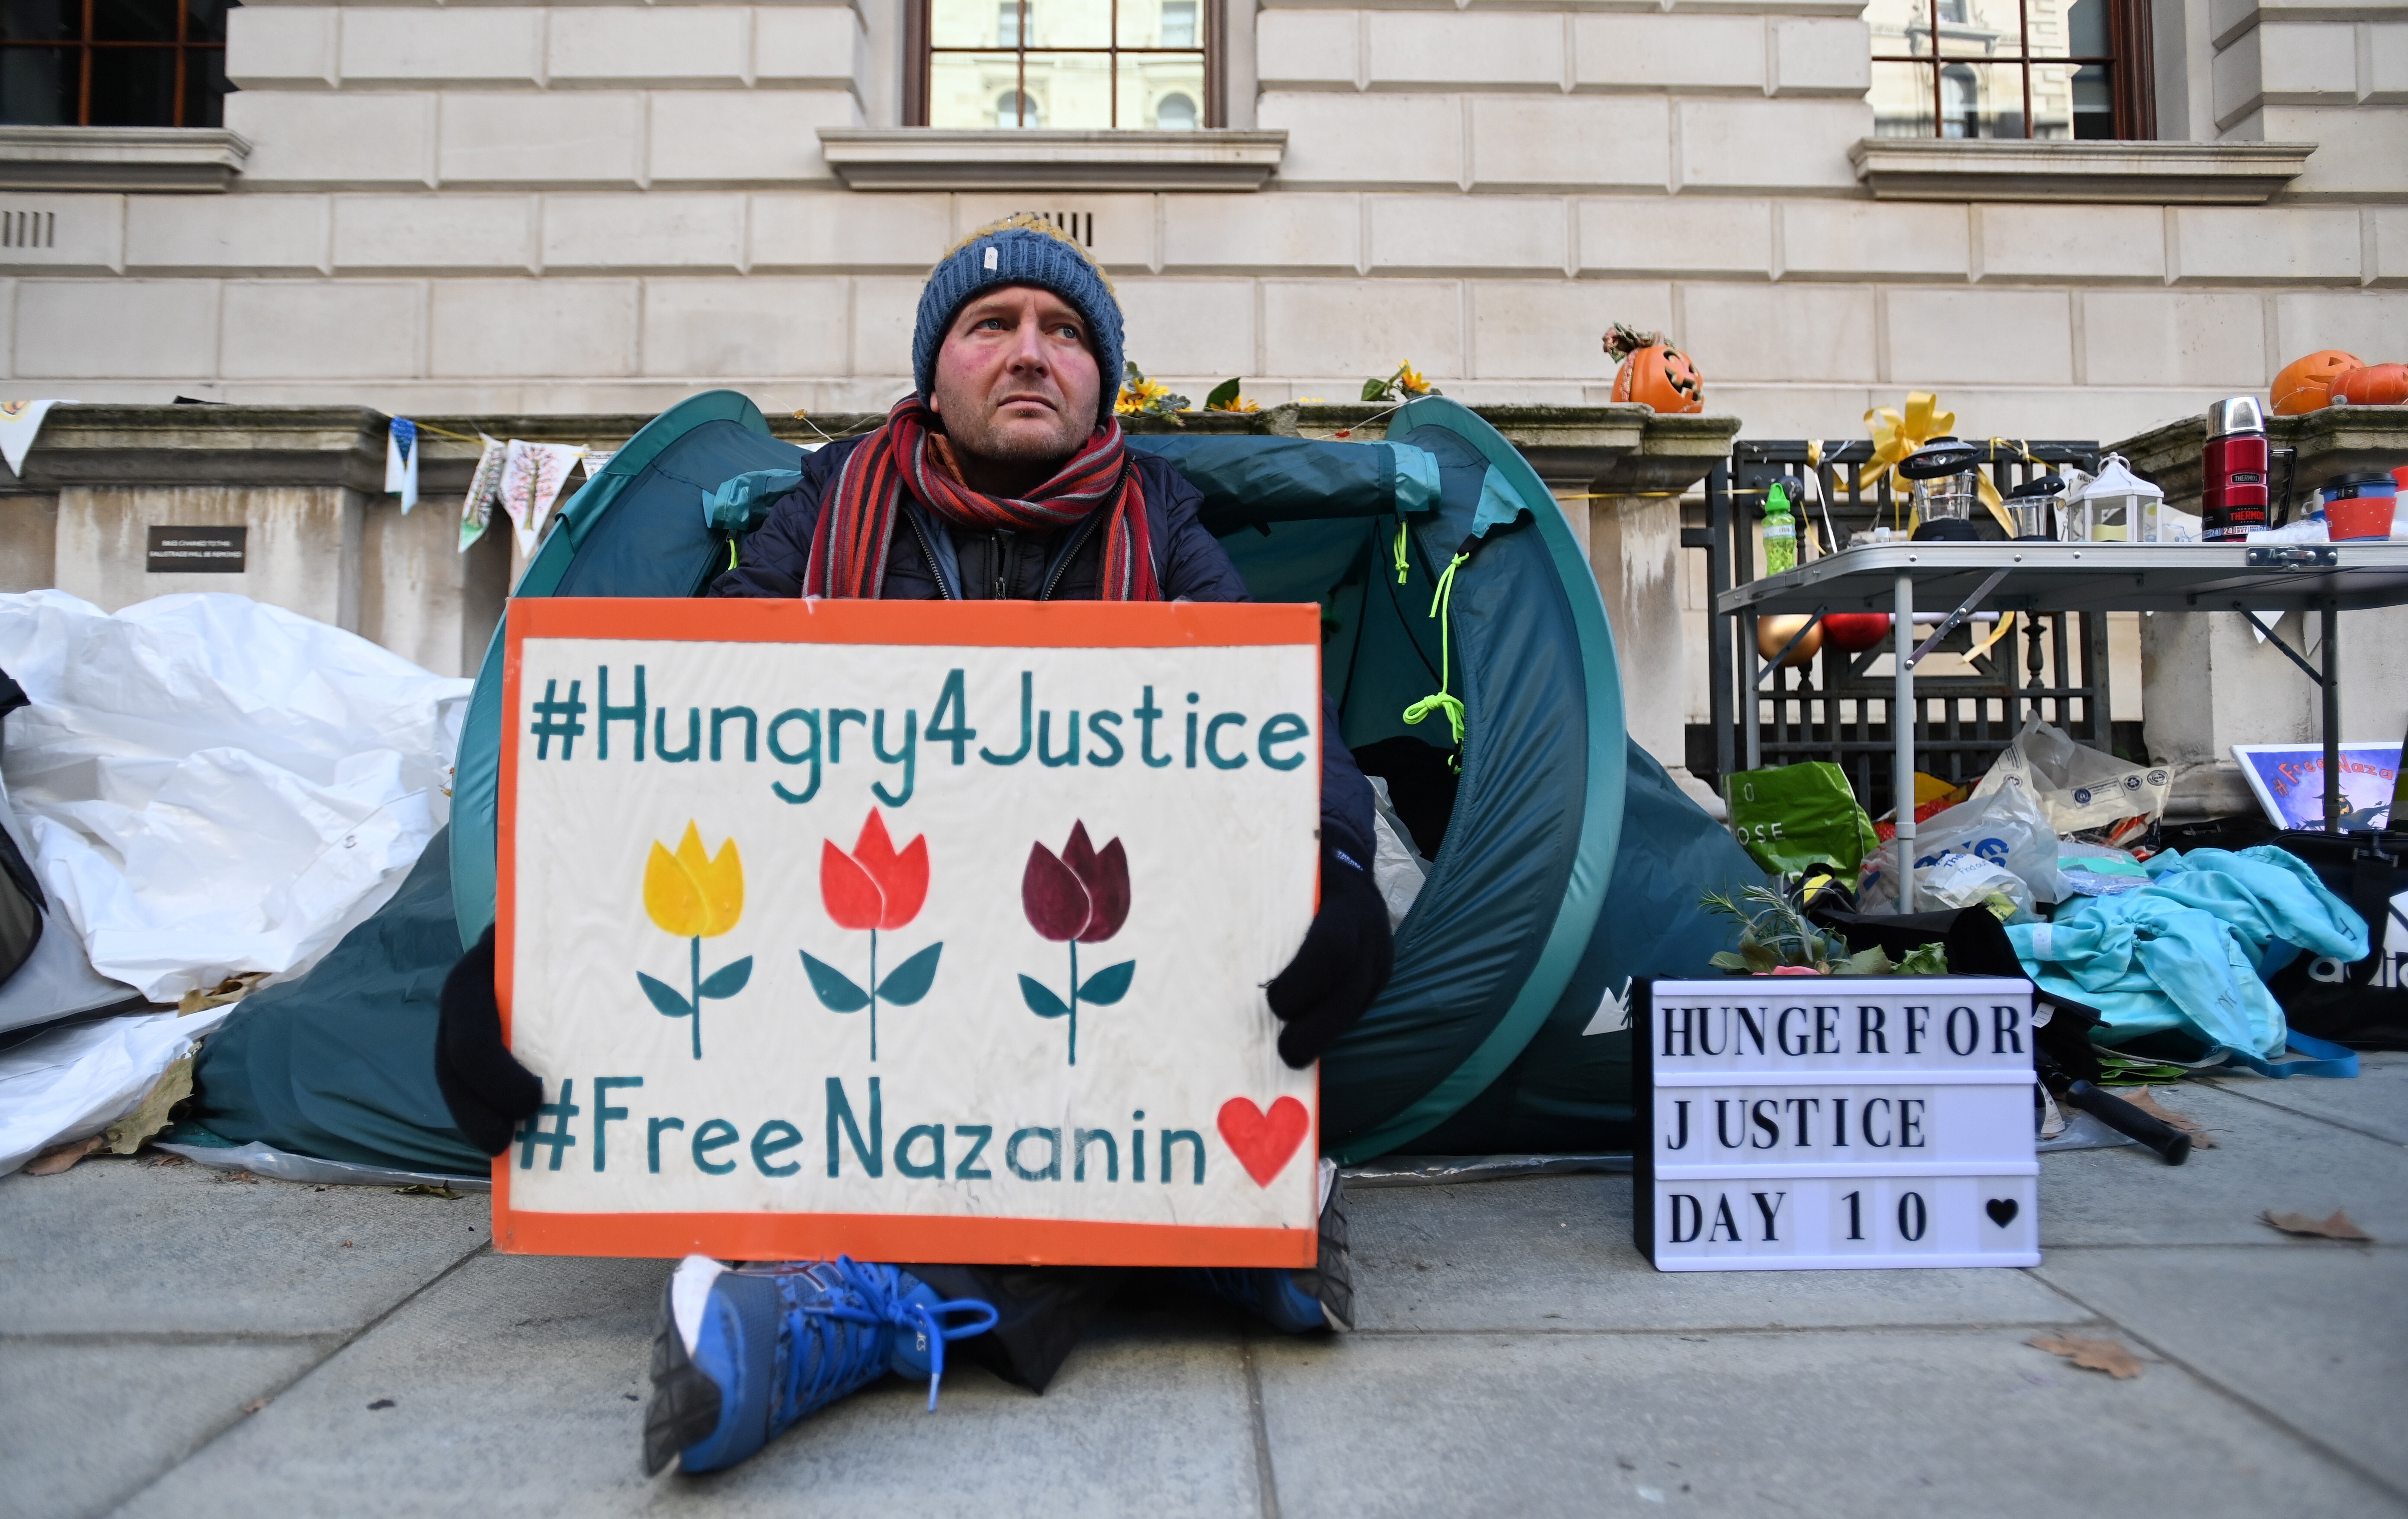 Richard Ratcliffe began a hunger strike outside the Foreign Office in London some two weeks ago. Photo: EPA-EFE